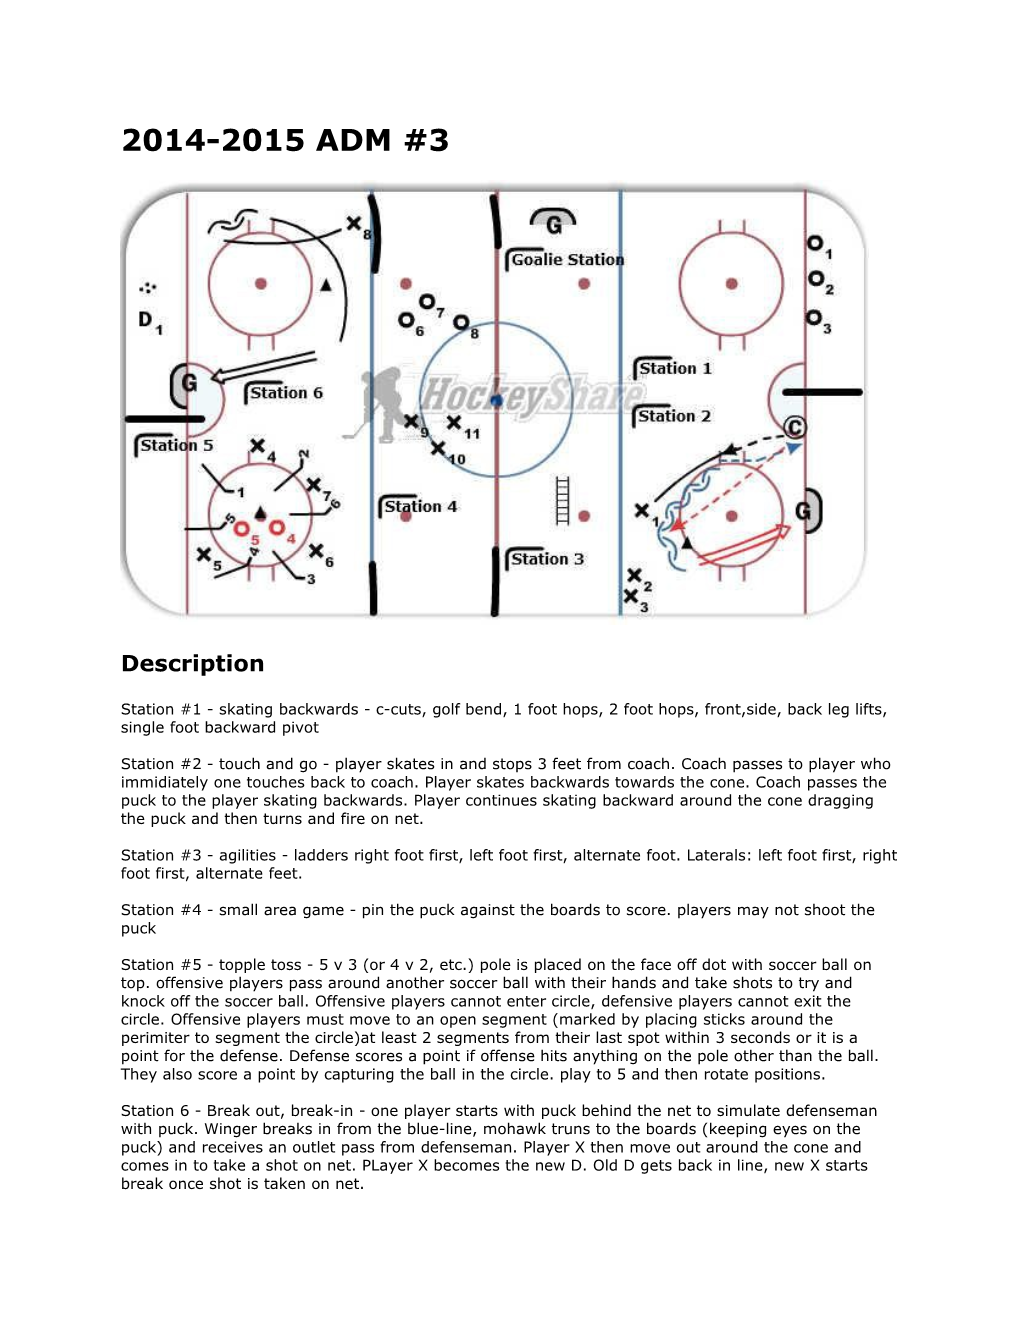 5 Minutes - Free Play 10 Minutes - Game - 4 on 4 Support Drill 6 Station X 7 Minutes